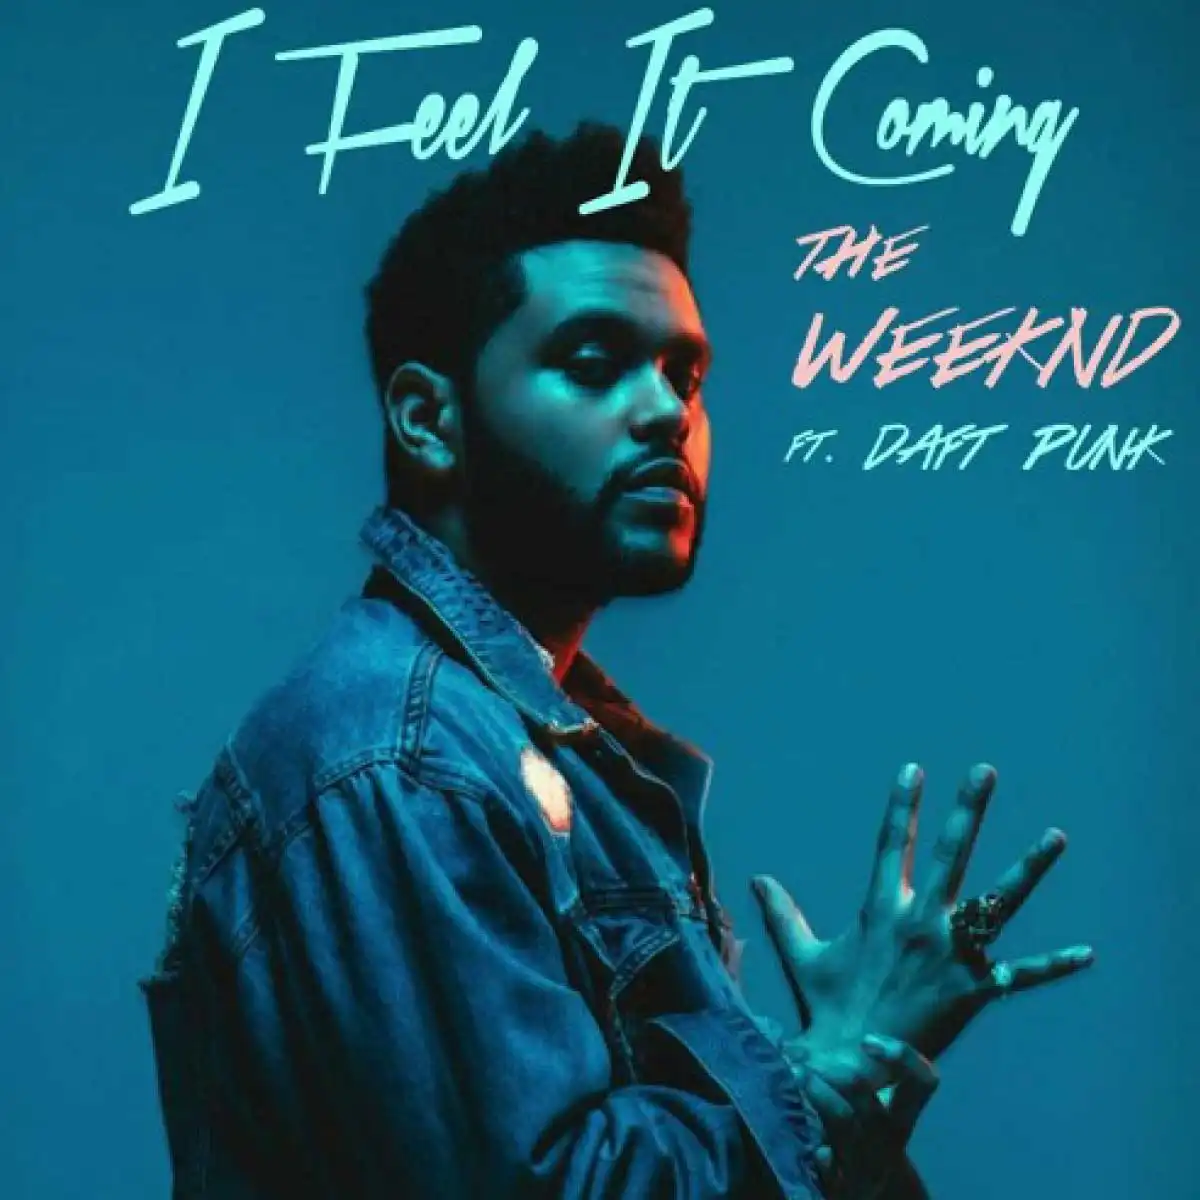 Feeling coming down. The Weeknd feat. I feel it coming the Weeknd. The Weeknd i feel it coming ft. Daft Punk. The Weeknd - Starboy ft. Daft Punk.